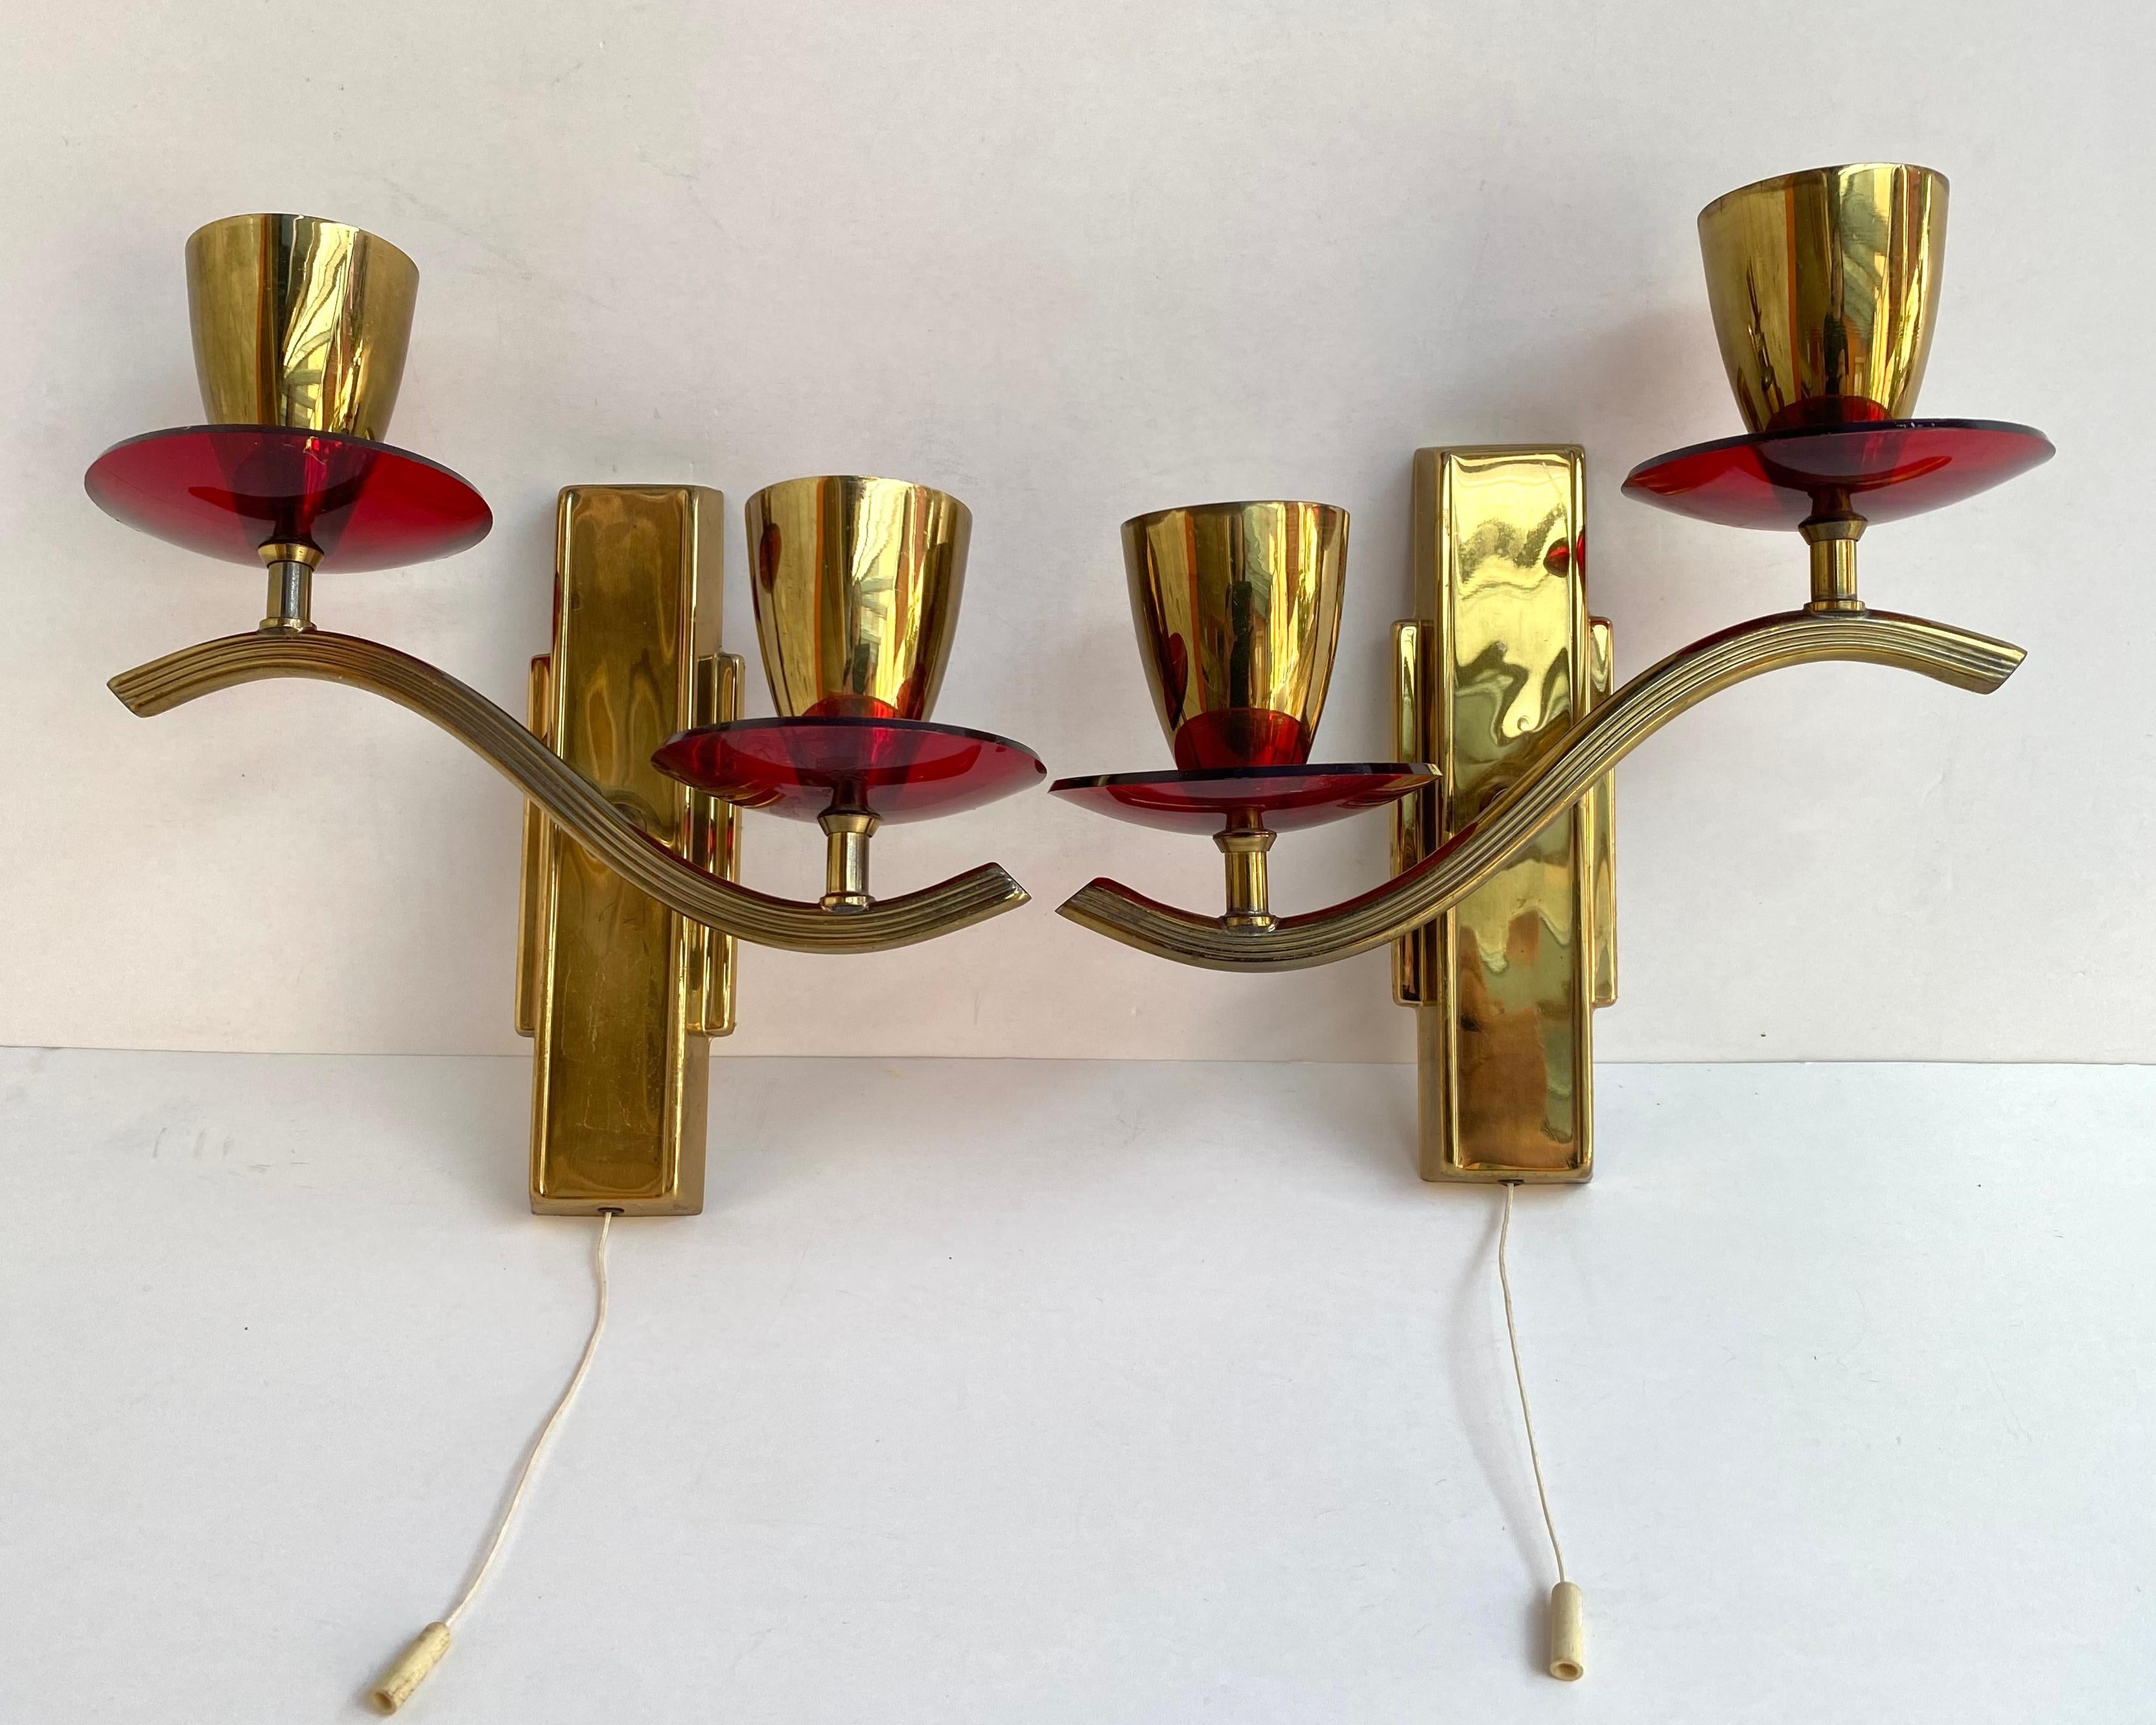 Stylish Paired wall sconces in beautiful gilt brass and ruby plexiglass decorative elements from the German manufacturer. 1970s.

Vintage Set of Wall Lighting lamps with 2 horns on each.

Very noble and sensual! Such wall lamps will effectively